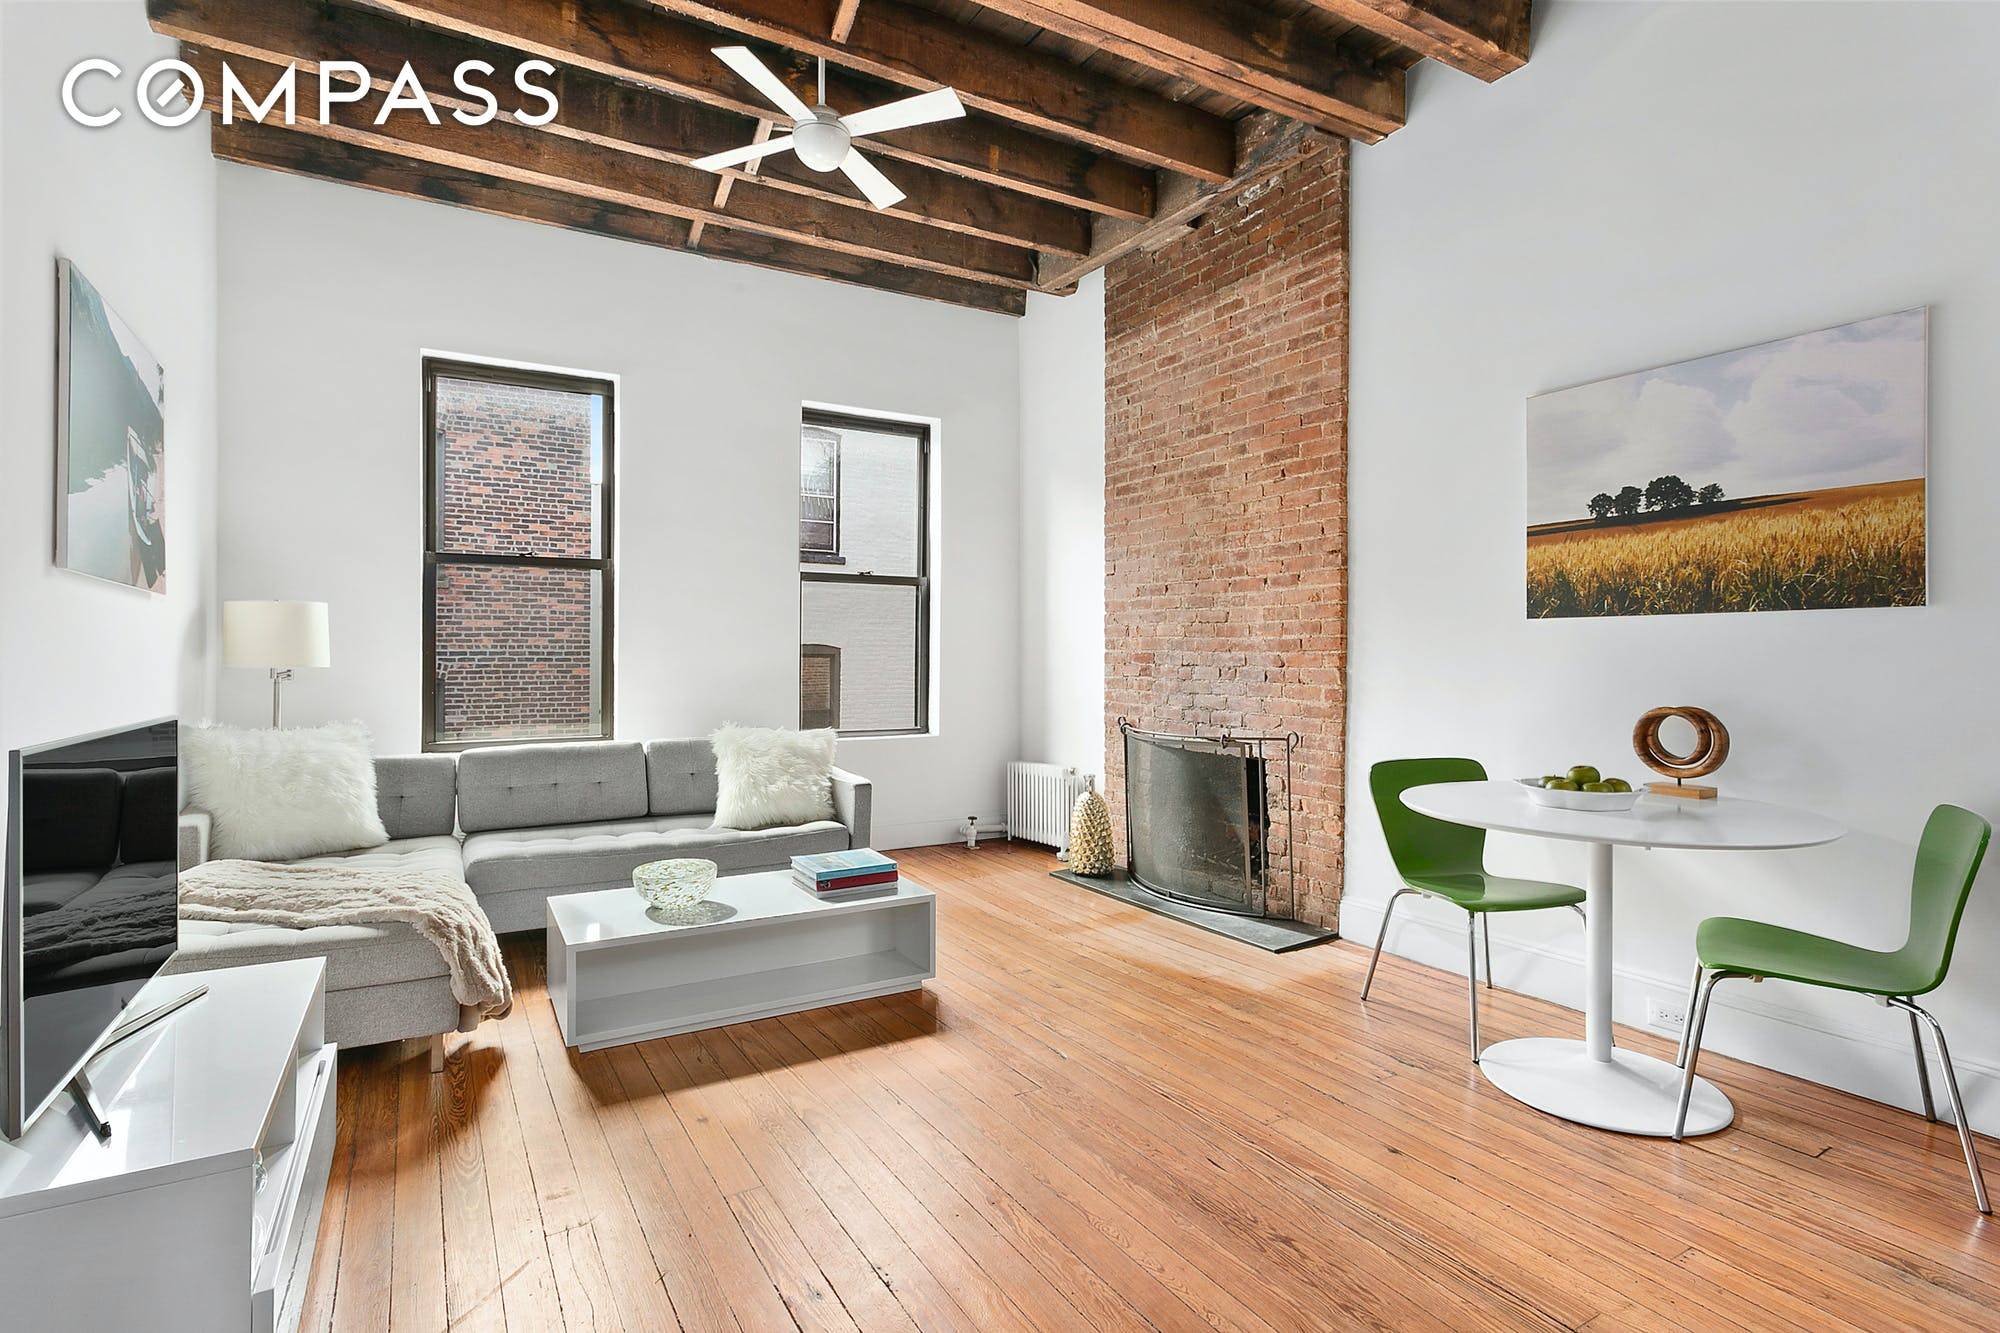 The quintessential West Village one bedroom home beamed ceiling, exposed brick, hardwood floors, and a fireplace which can be made wood burning.